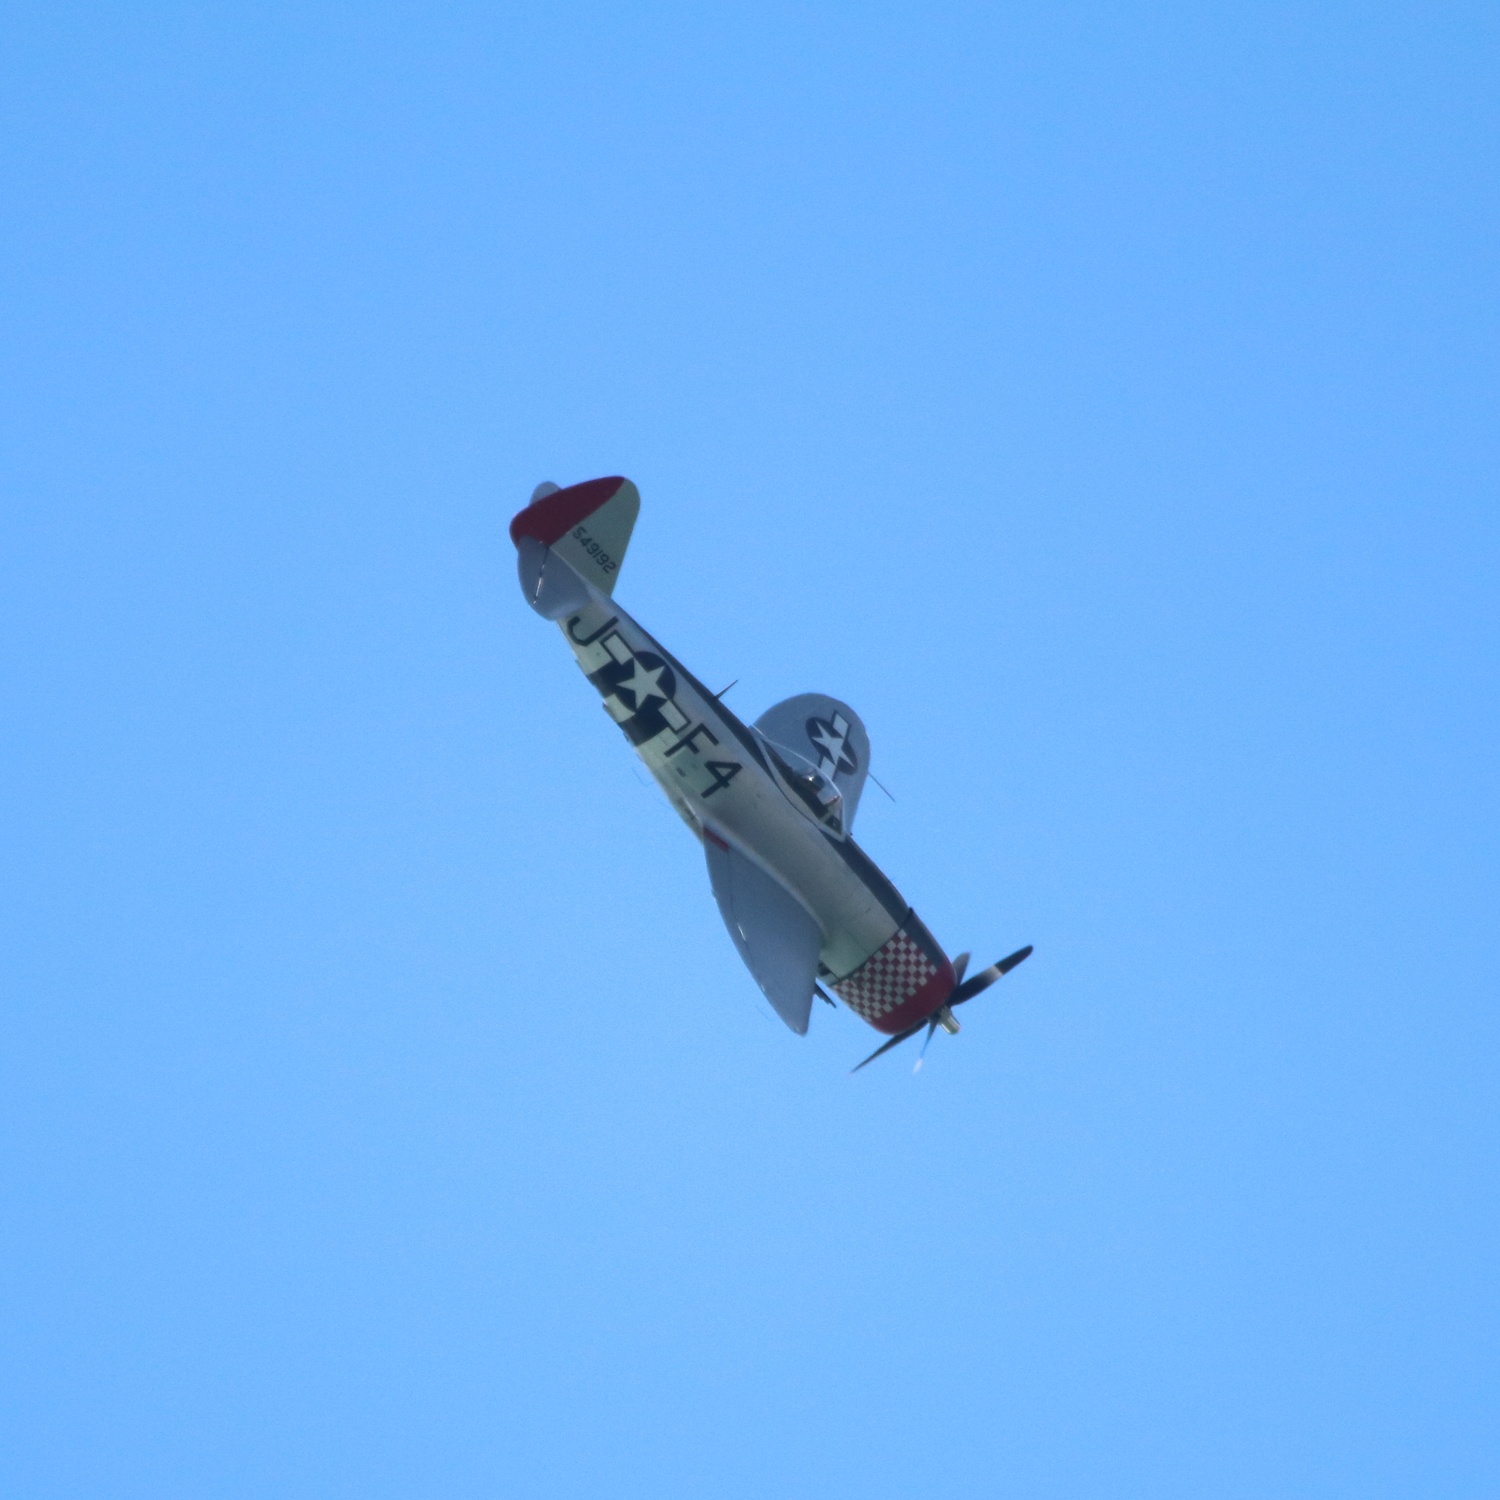 Republic P-47 Thunderbolt flying down and right against clear blue sky